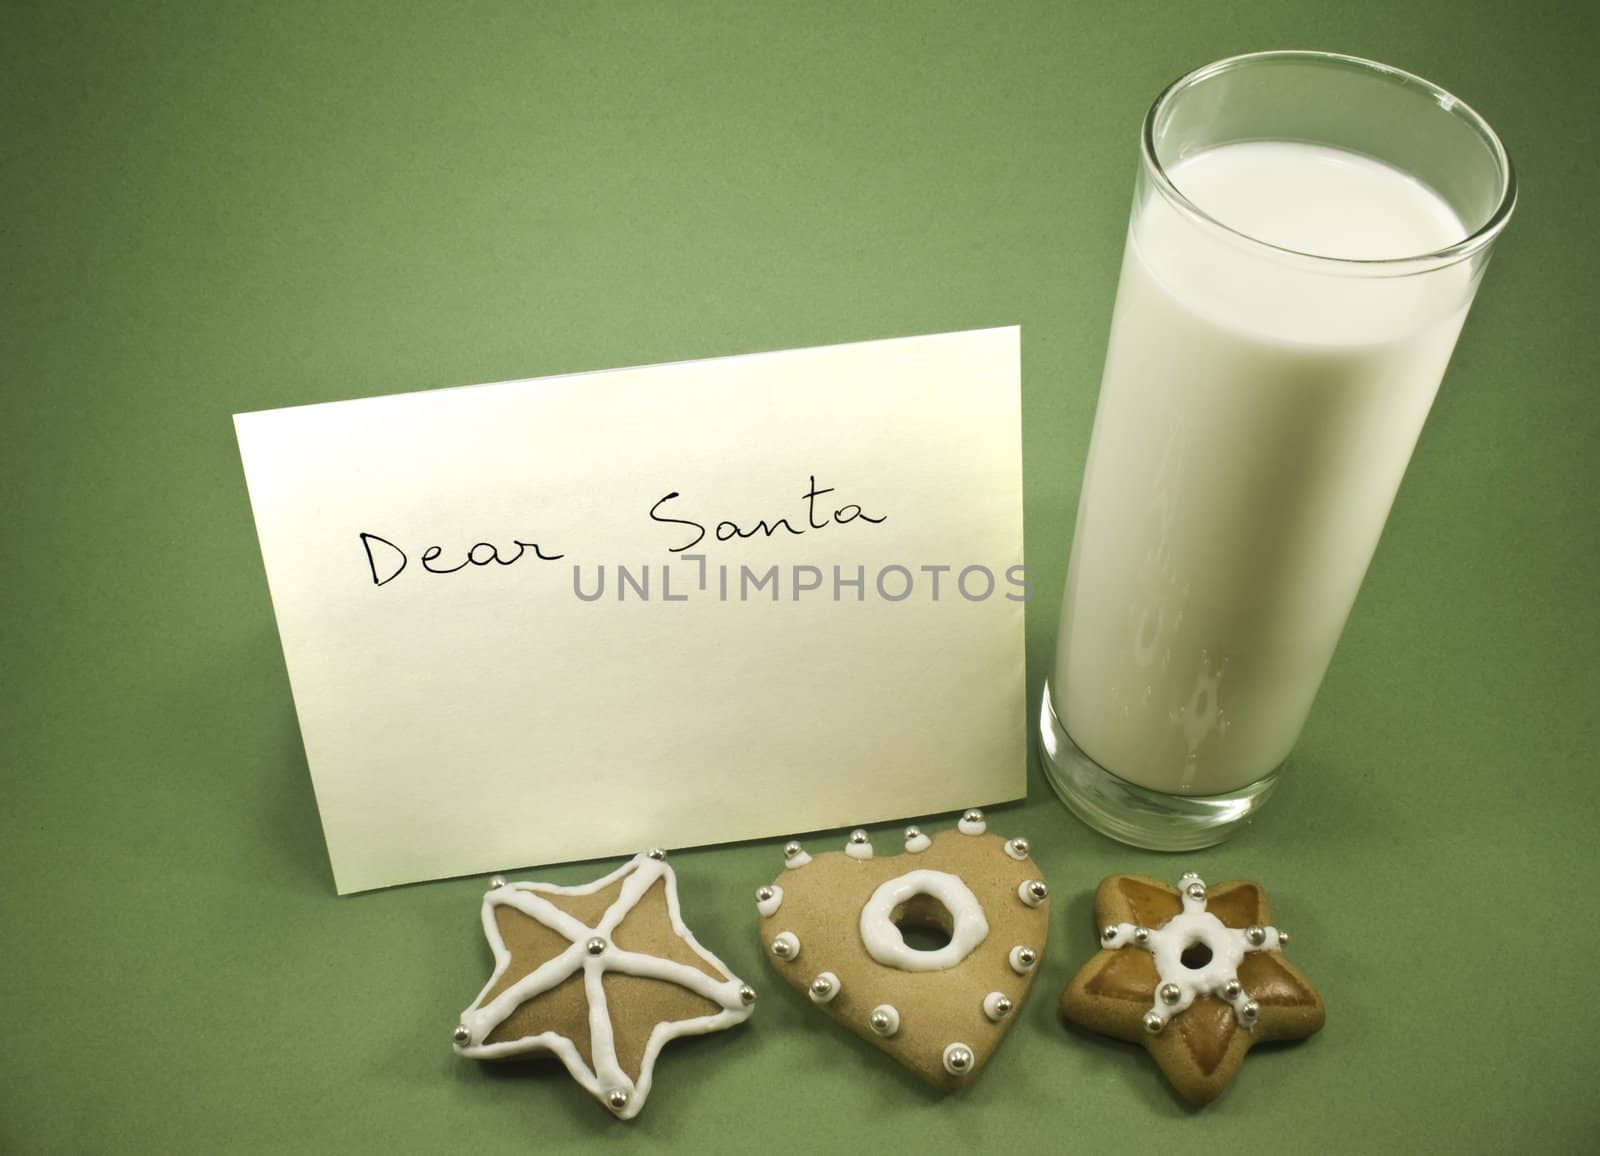 Cookies, milk and a letter to Santa by timscottrom